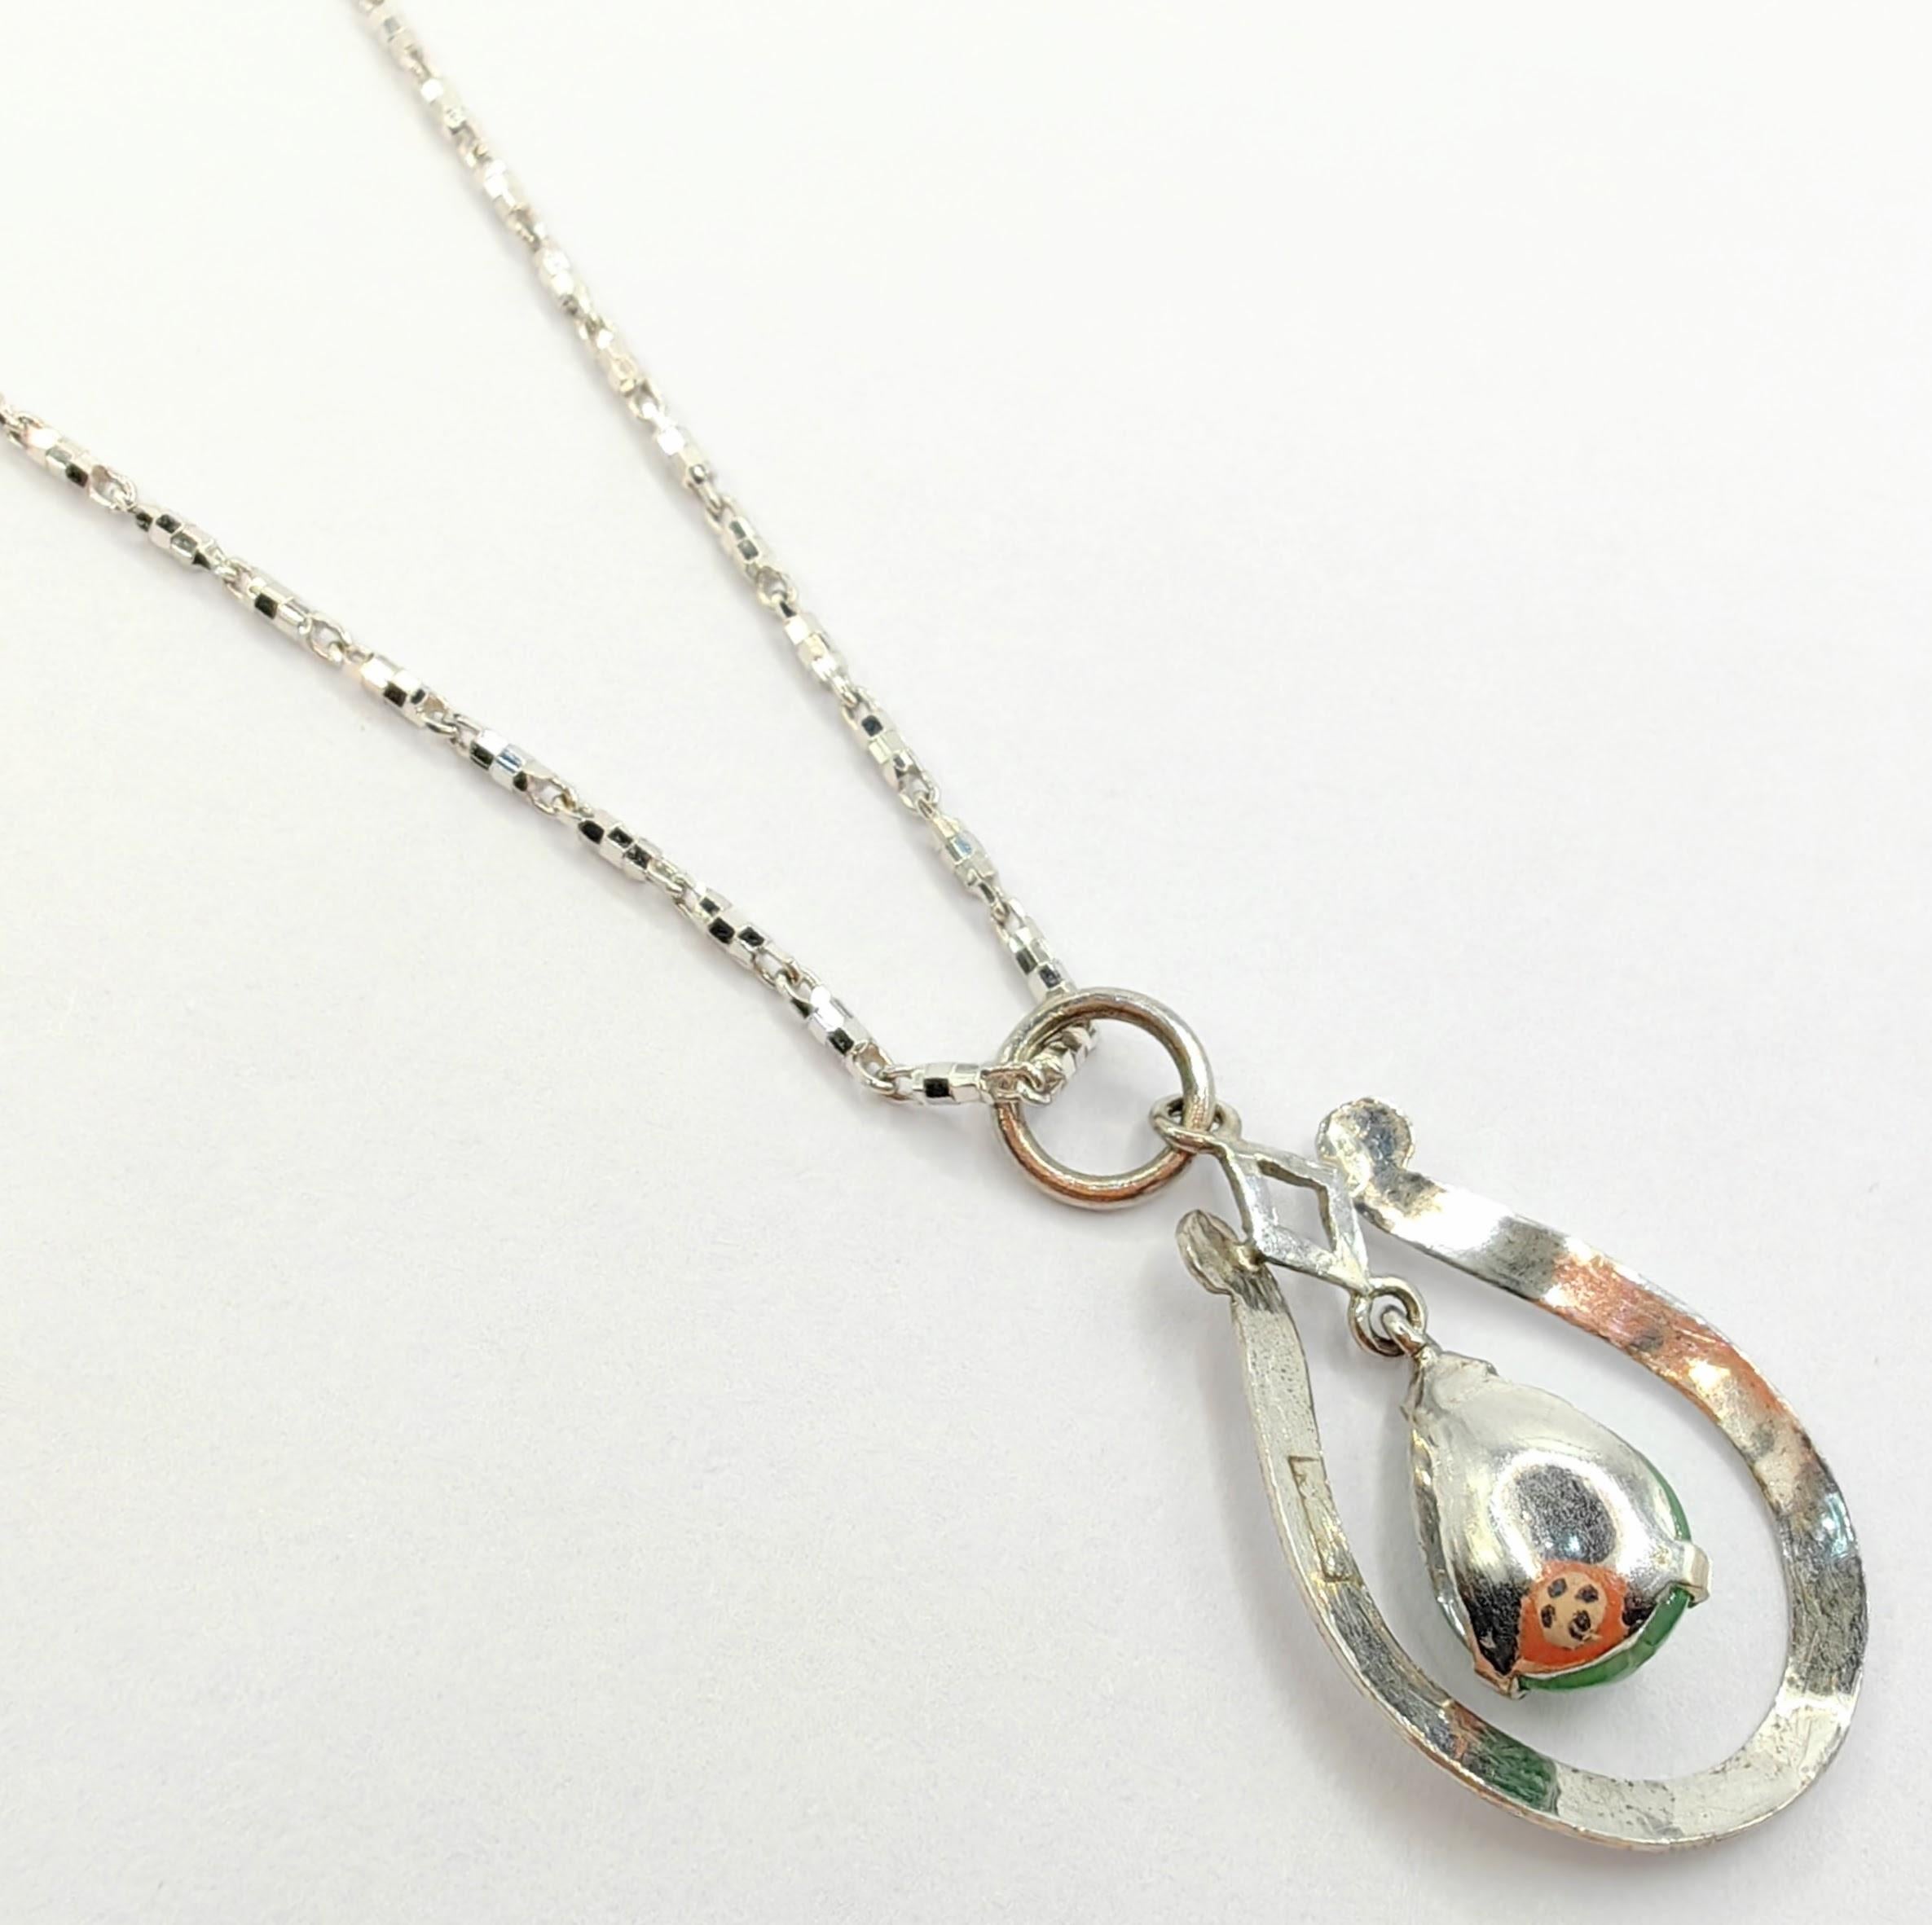 Vintage Pear Shaped Teardrop Jade Pendant in Sterling Silver In New Condition For Sale In Wan Chai District, HK